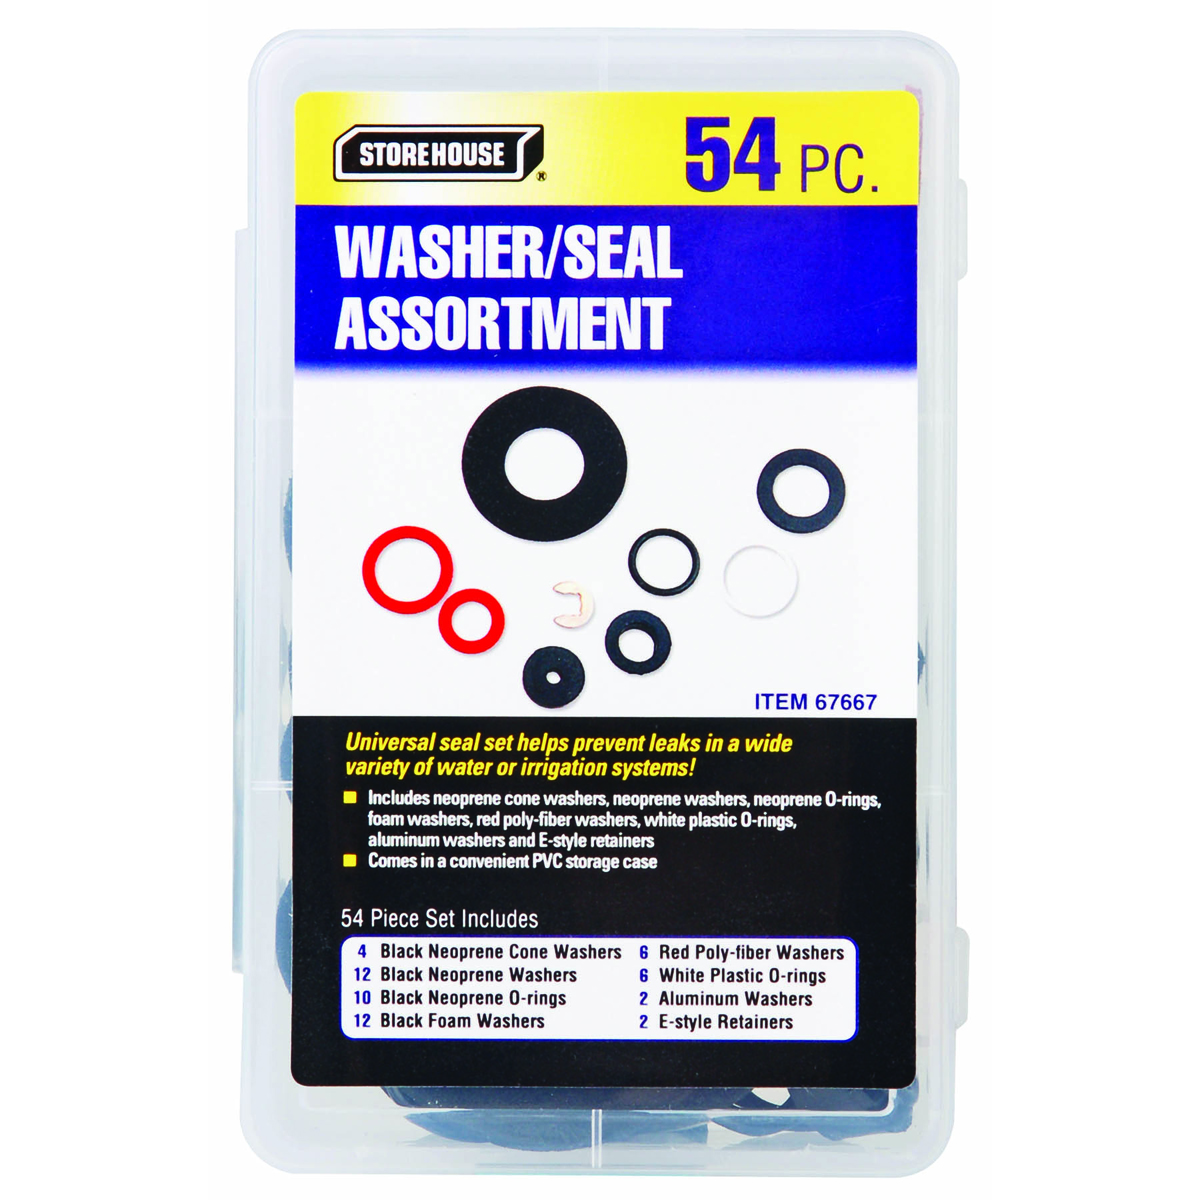 STOREHOUSE 54 Piece Washer/Seal Assortment - Item 67667